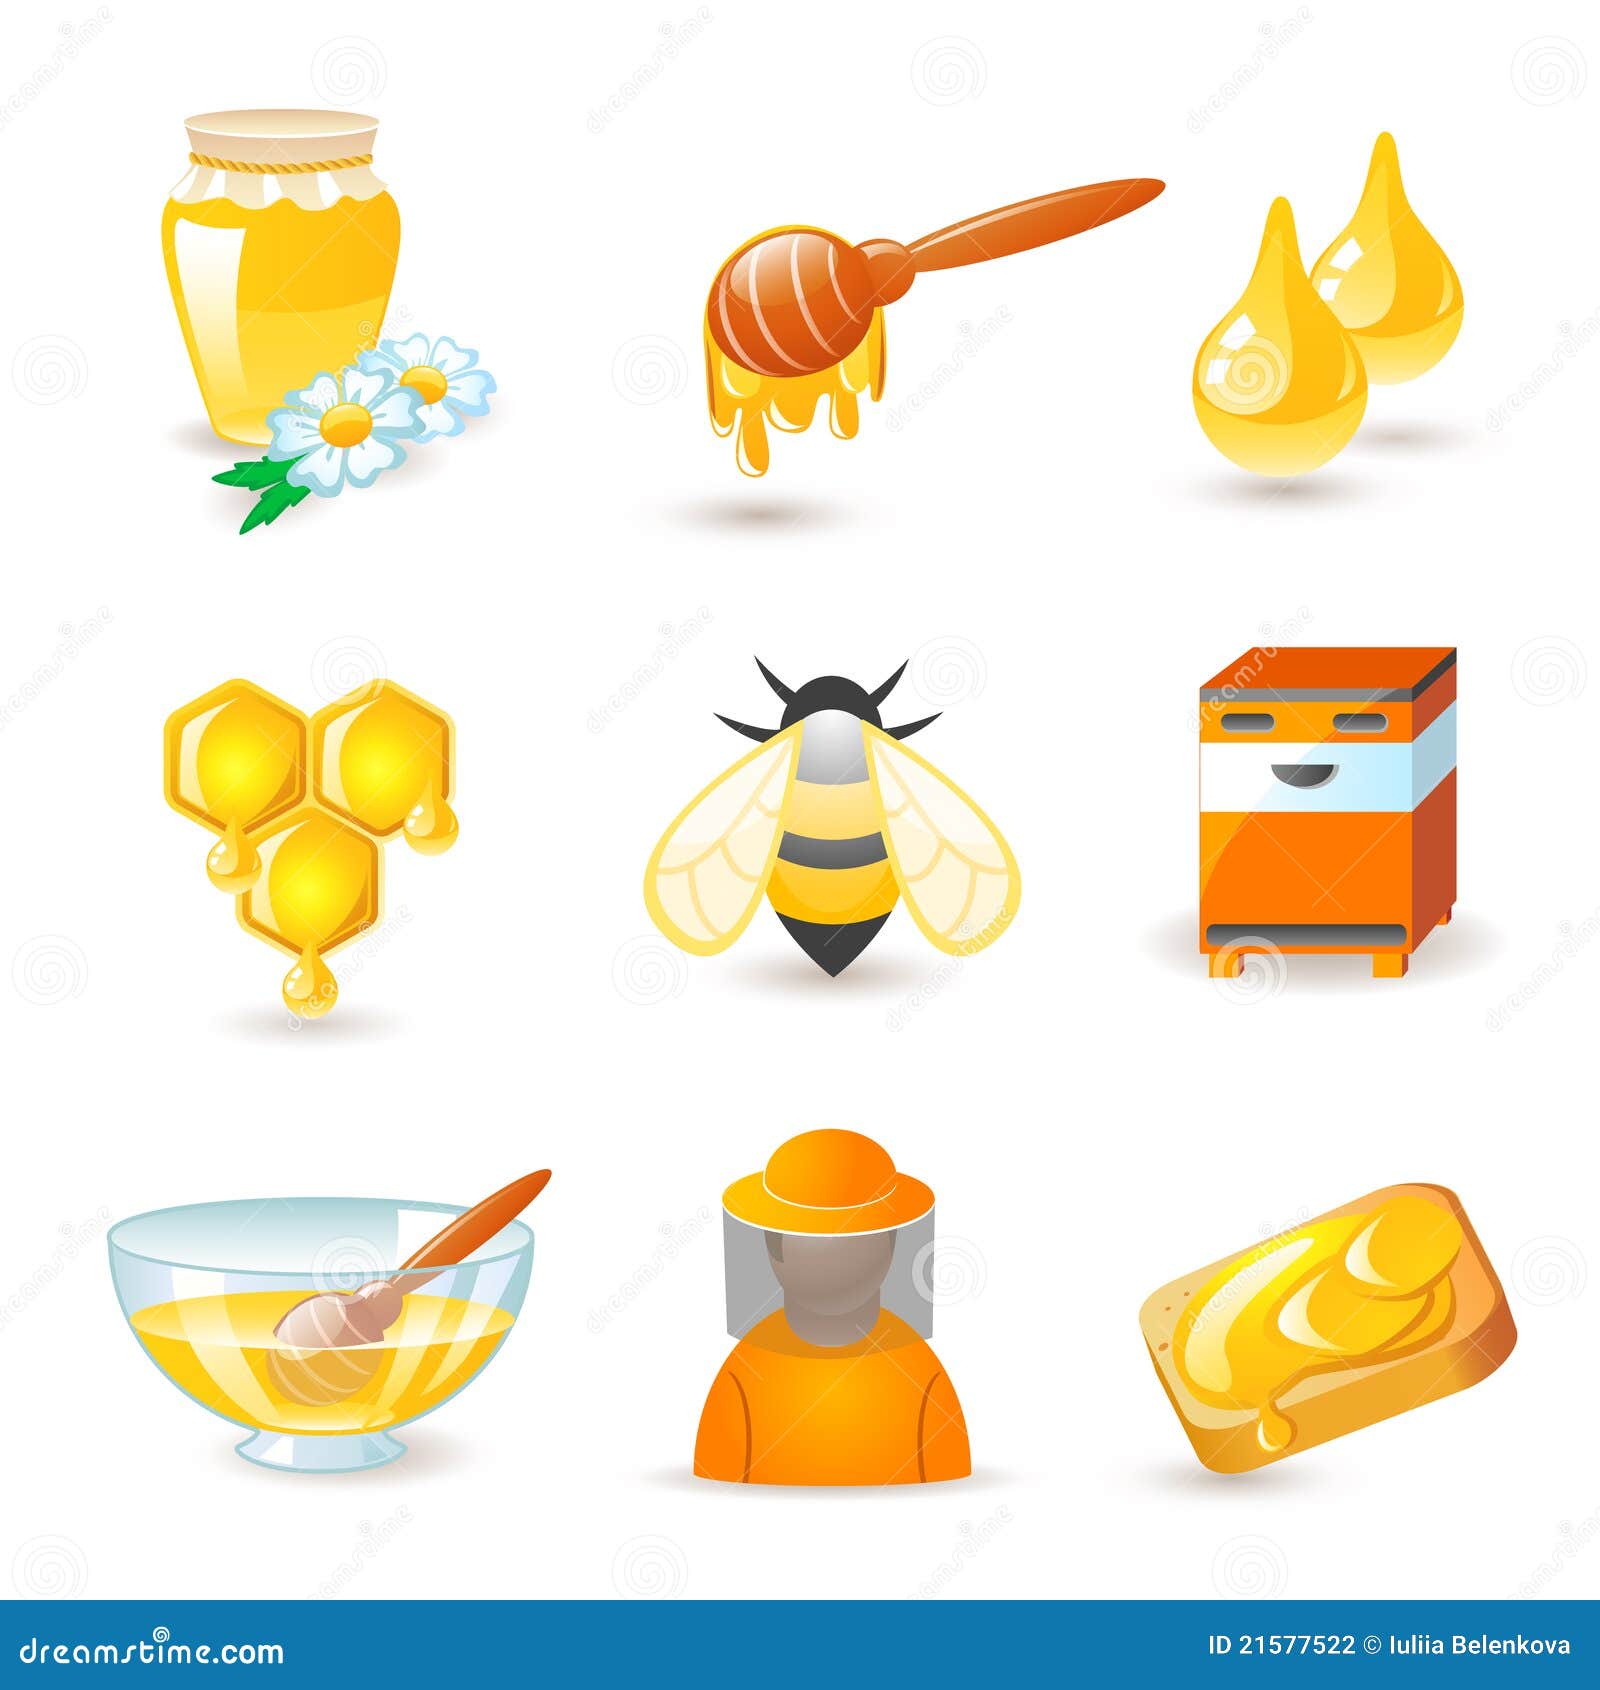 honey and beekeeping icons